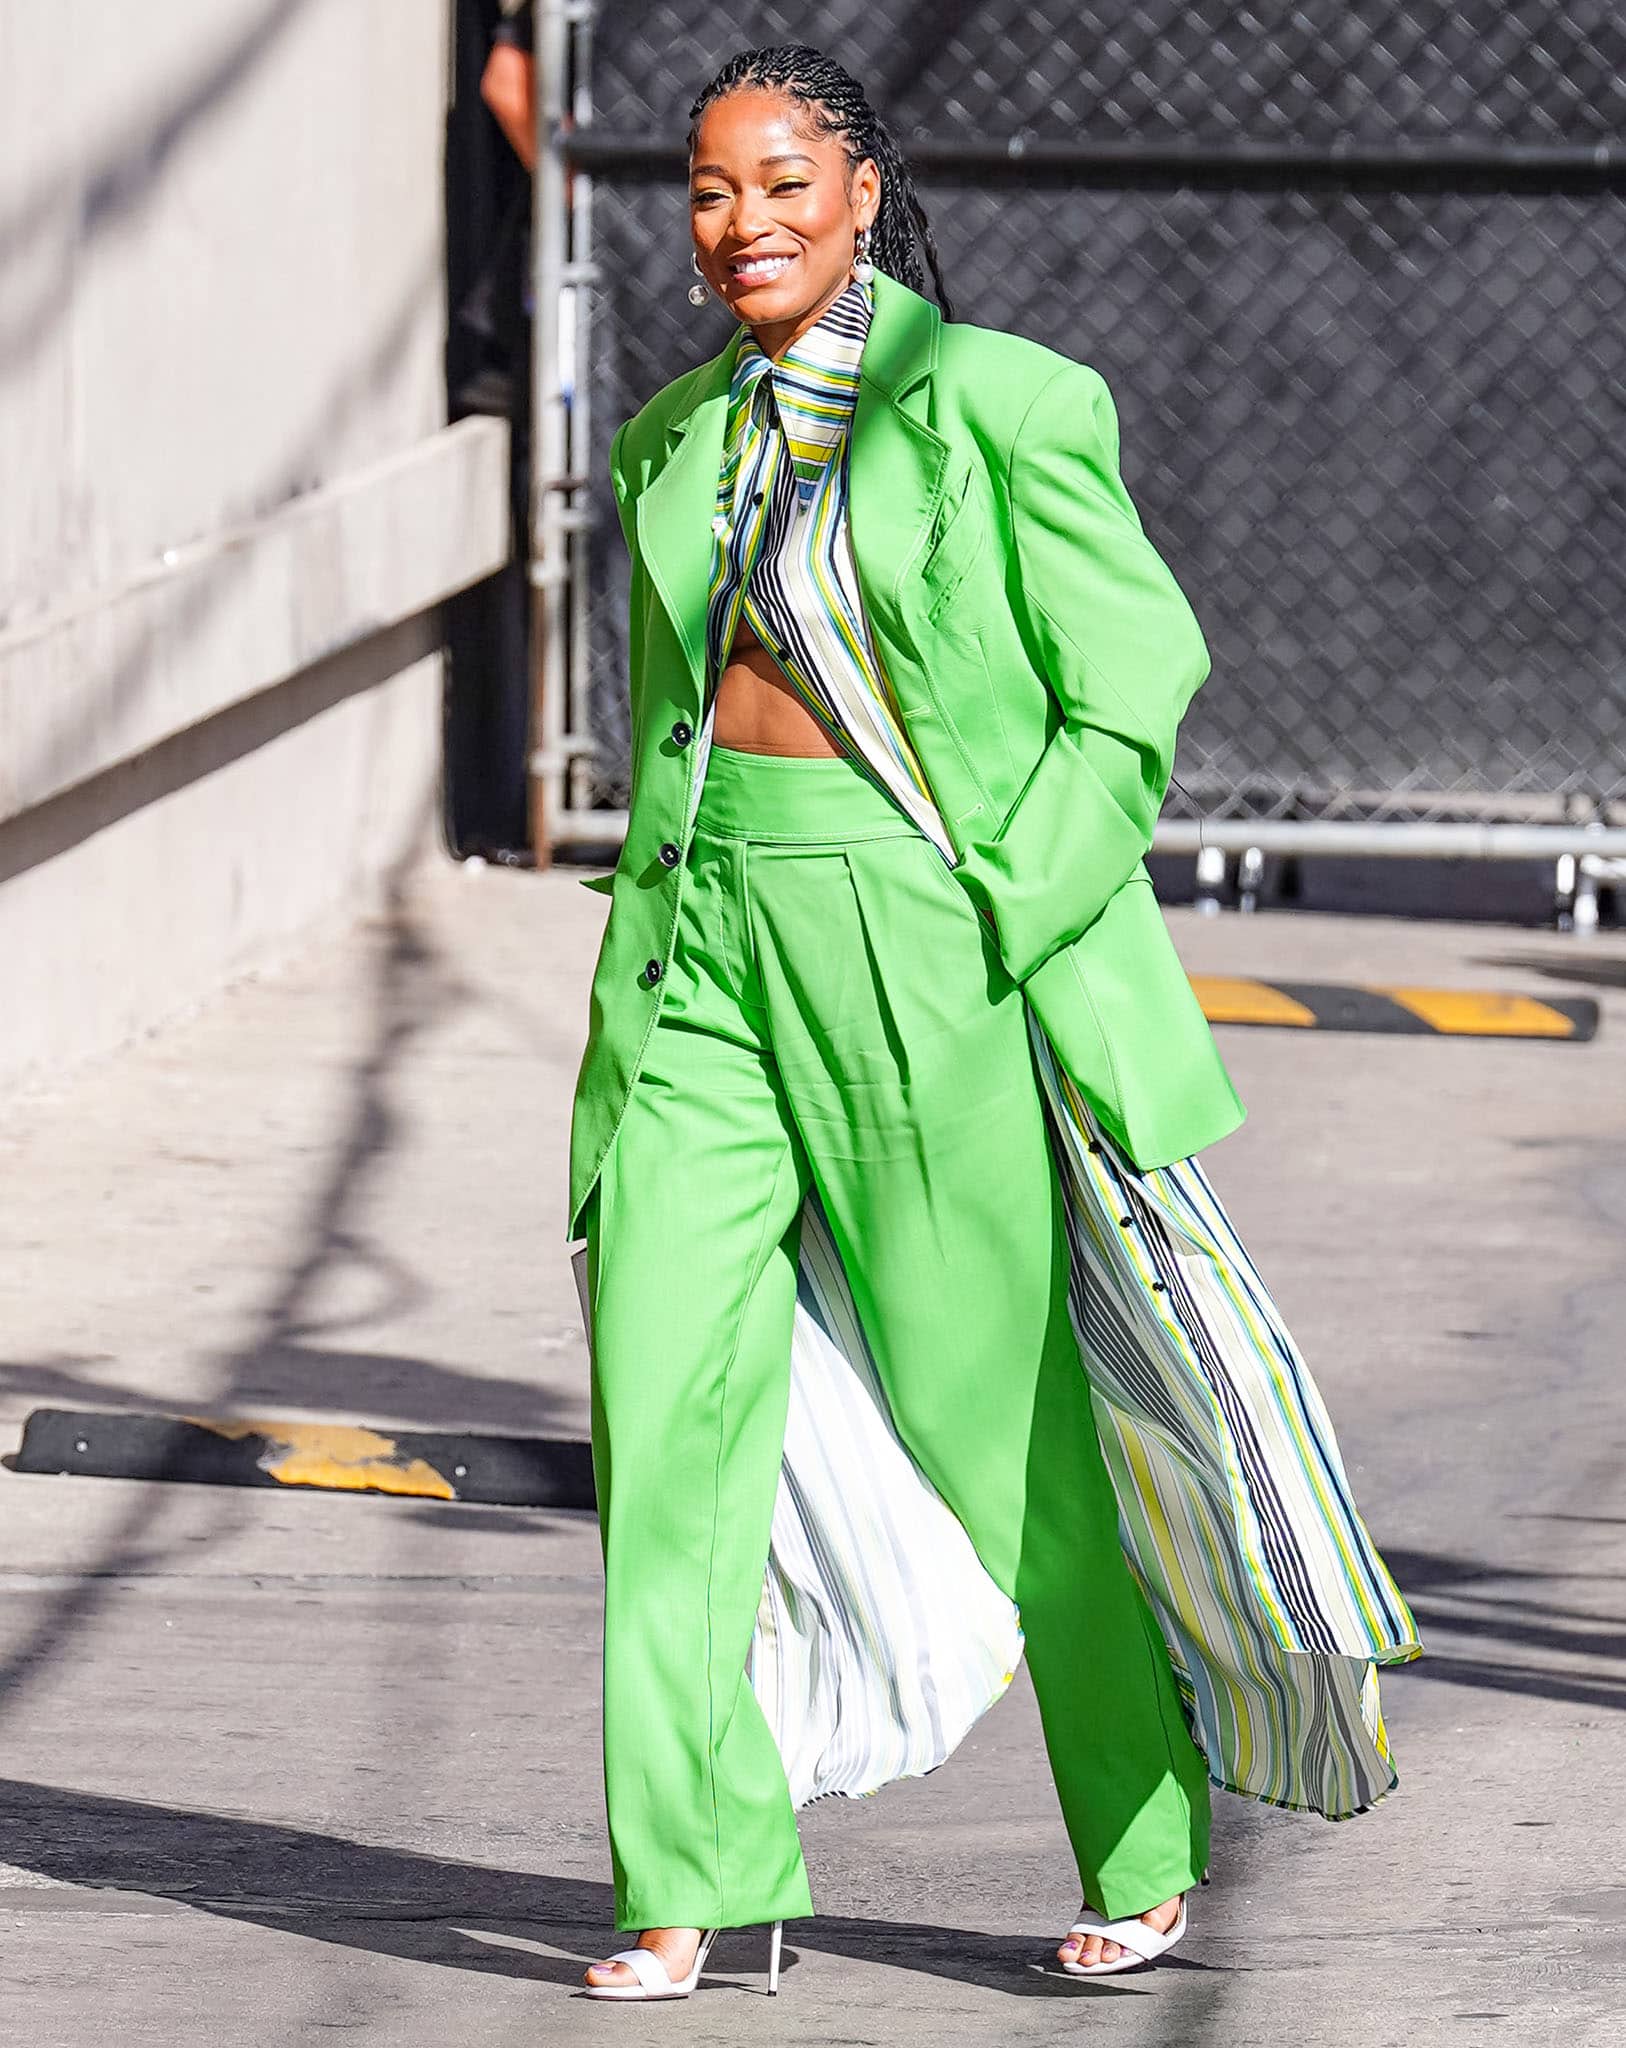 Keke Palmer couldn't be missed in a lime green Christopher John Rogers Resort 2022 suit for her Jimmy Kimmel Live! appearance